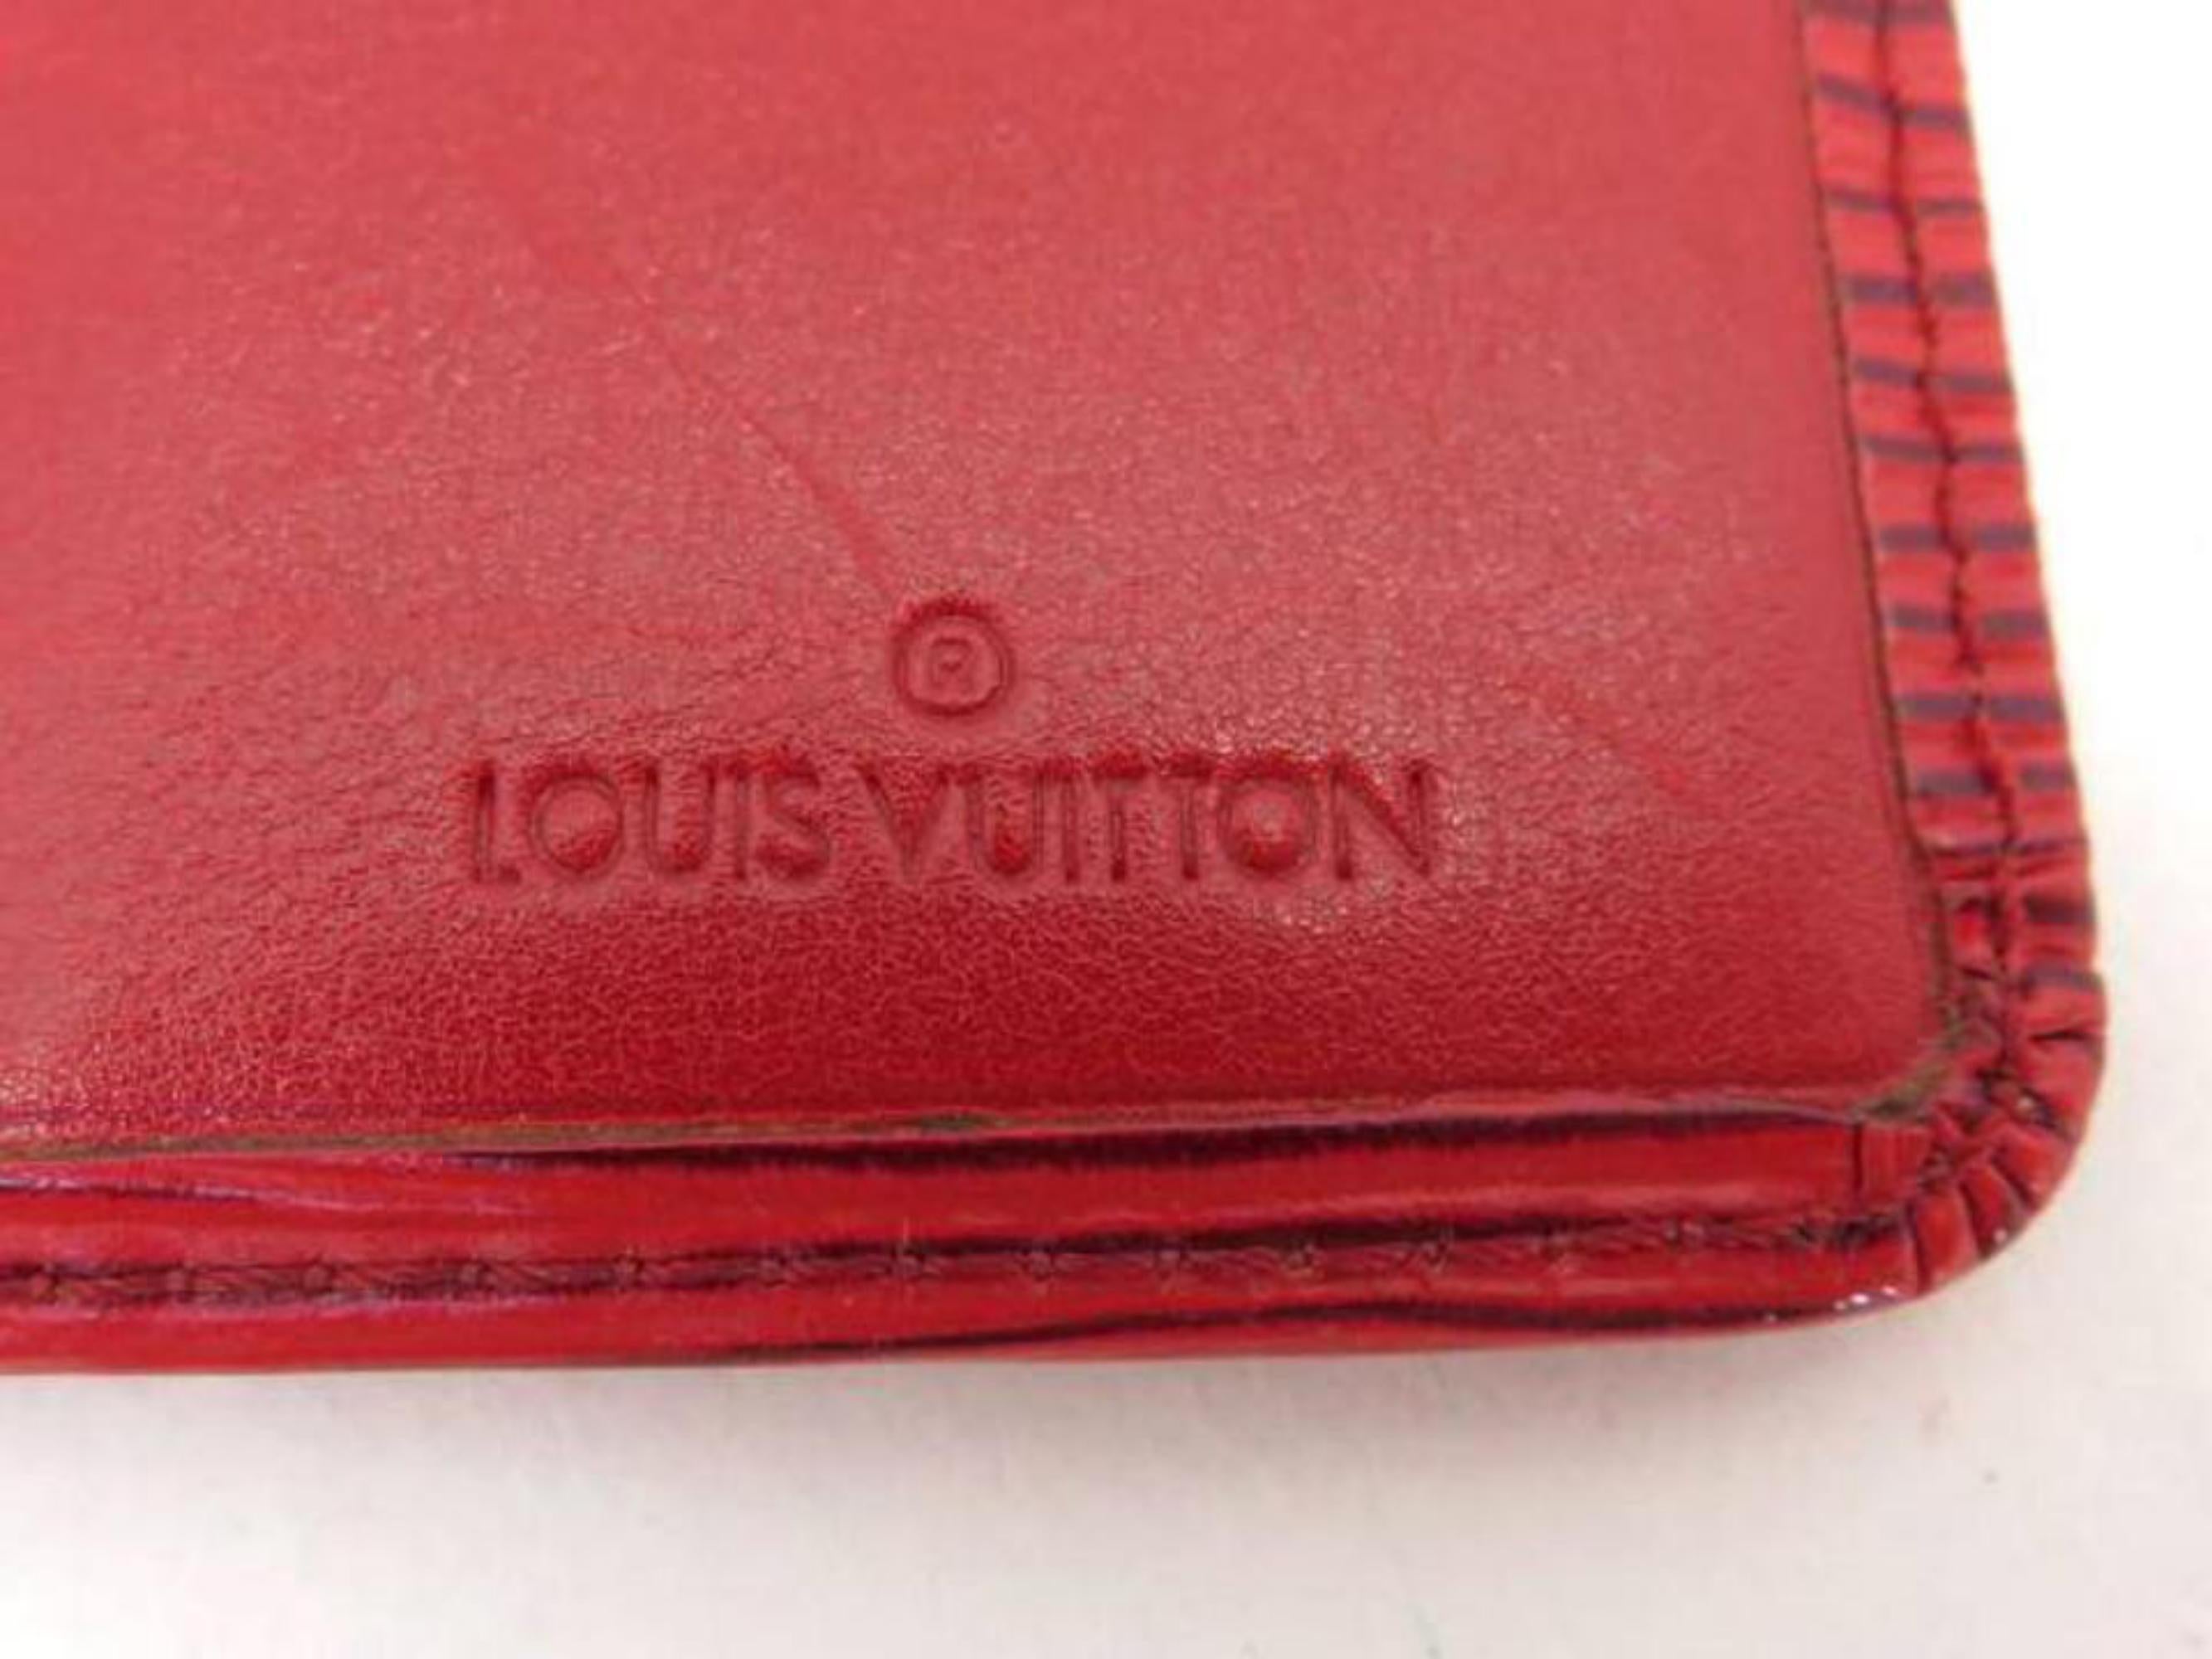 Louis Vuitton Bifold Wallet 222003 Red Epi Leather Shoulder Bag In Good Condition For Sale In Forest Hills, NY